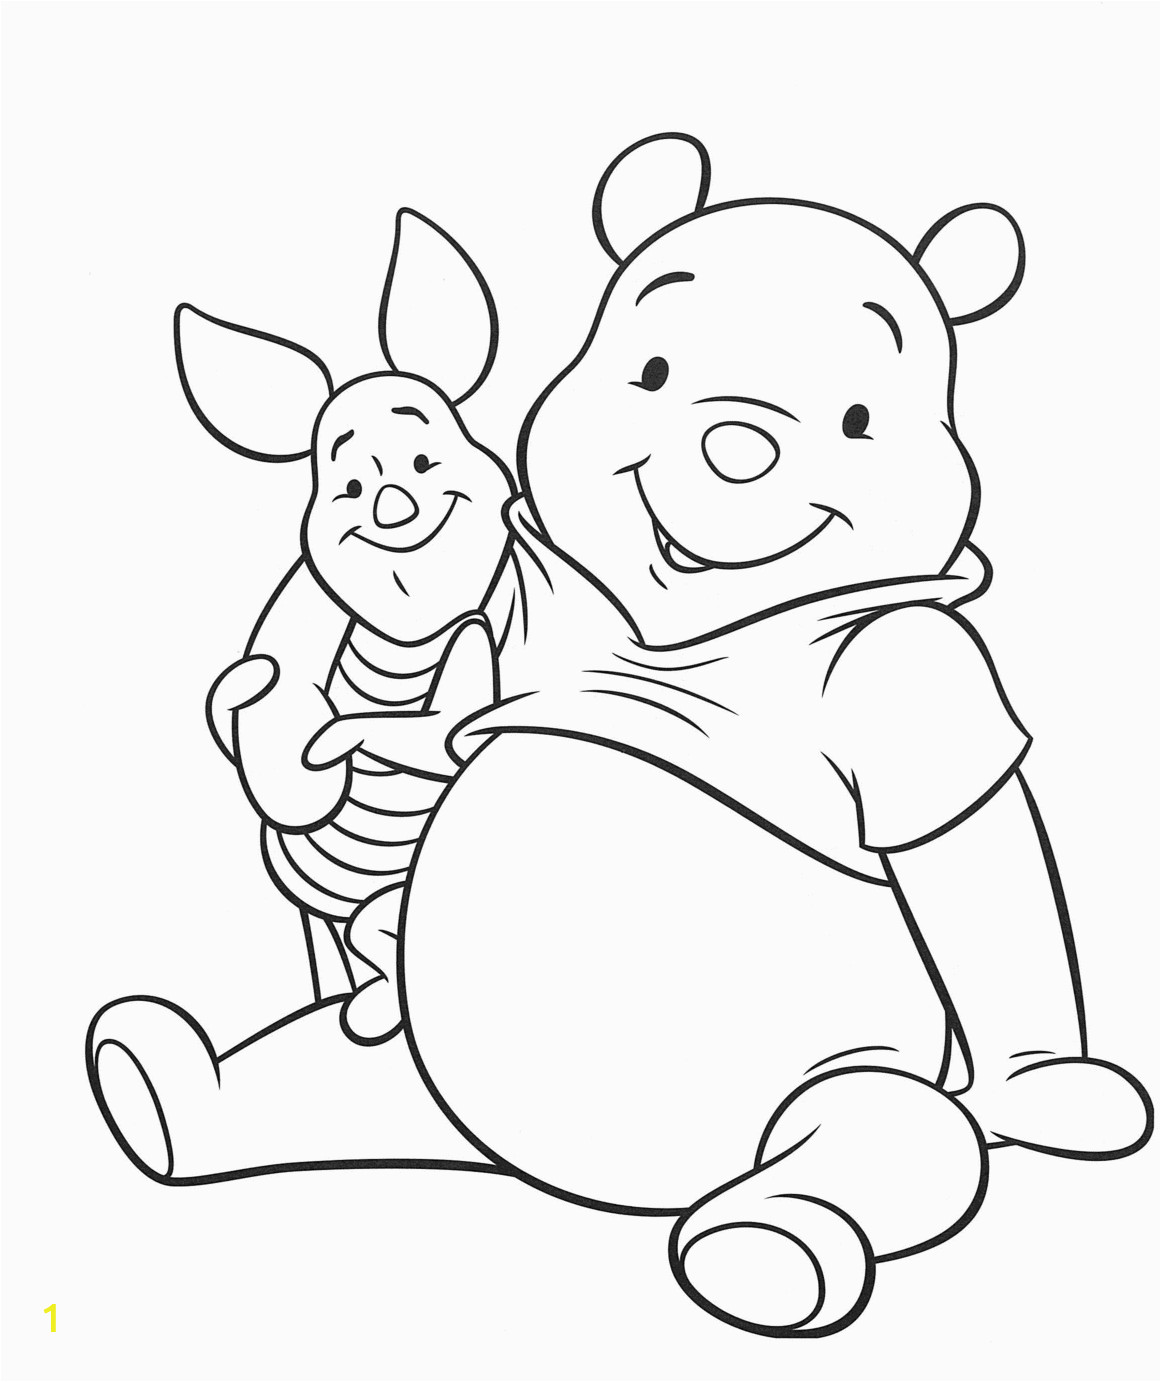 Piglet From Winnie the Pooh Coloring Pages Winnie Piglet Coloring Picture Winnie Piglet Coloring